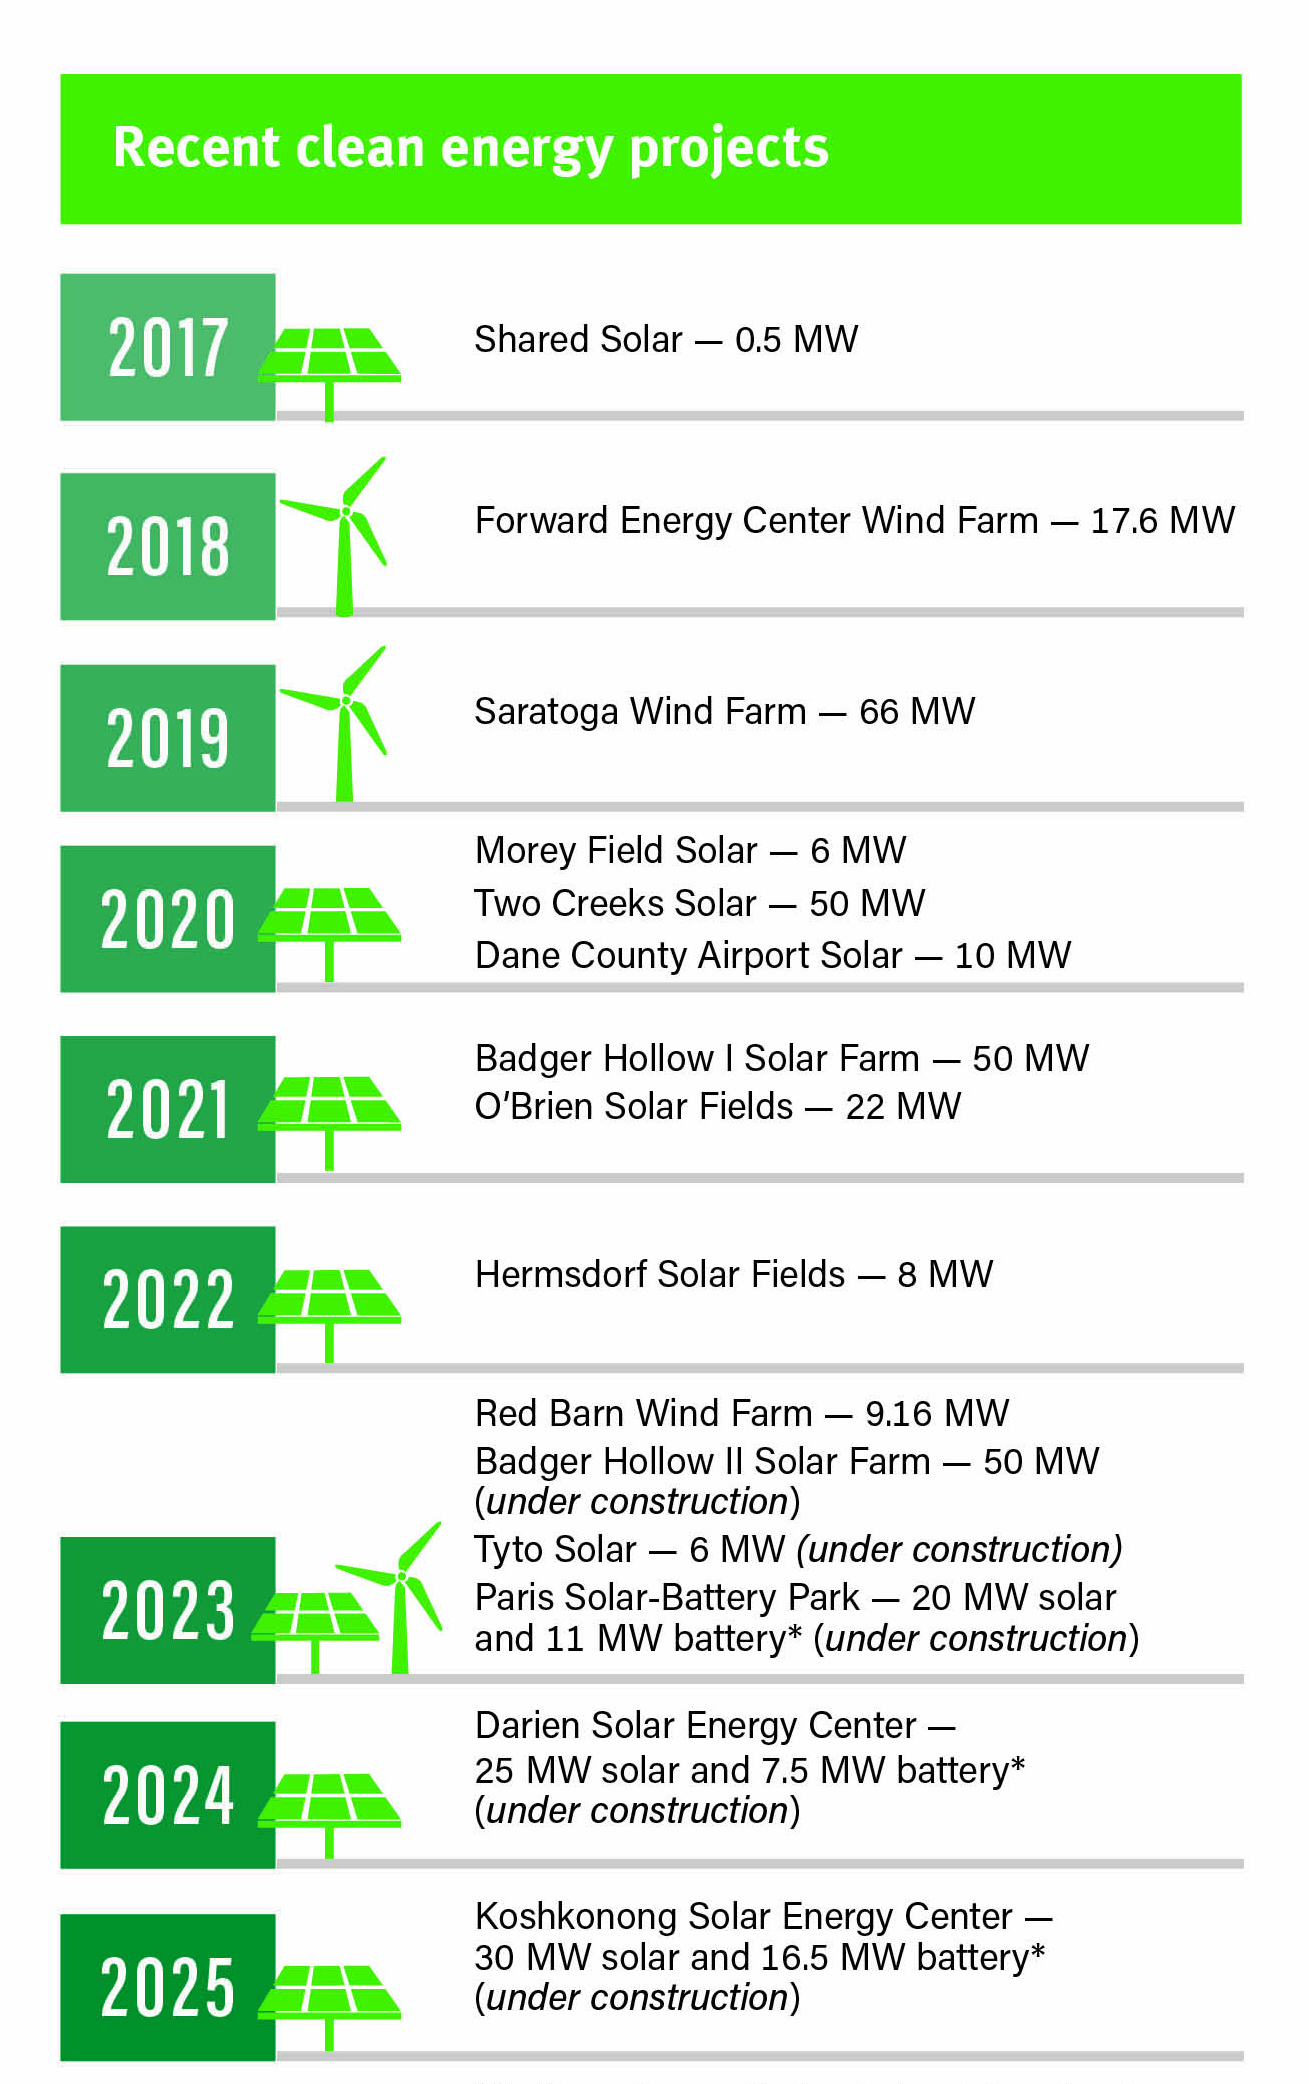 Recent clean energy projects timeline